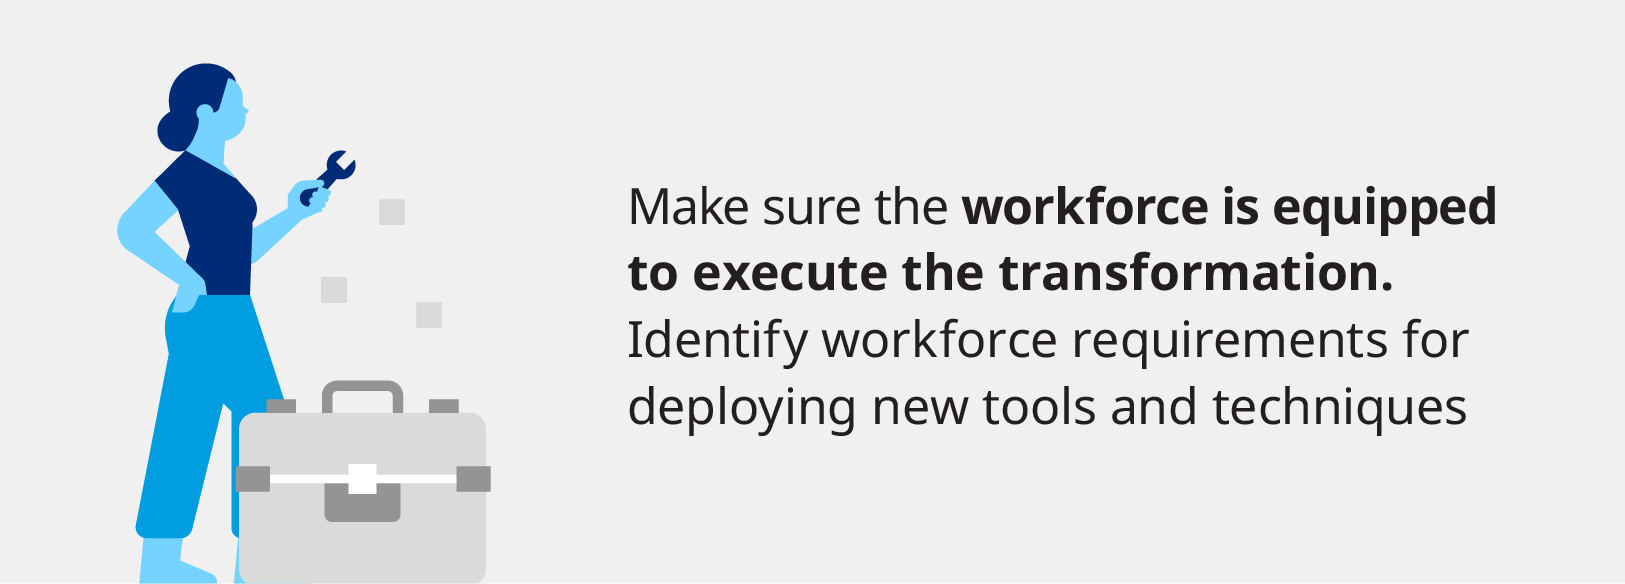 Make sure the workforce is equipped to execute the transformation. Identify workforce requirements for deploying new tools and techniques.